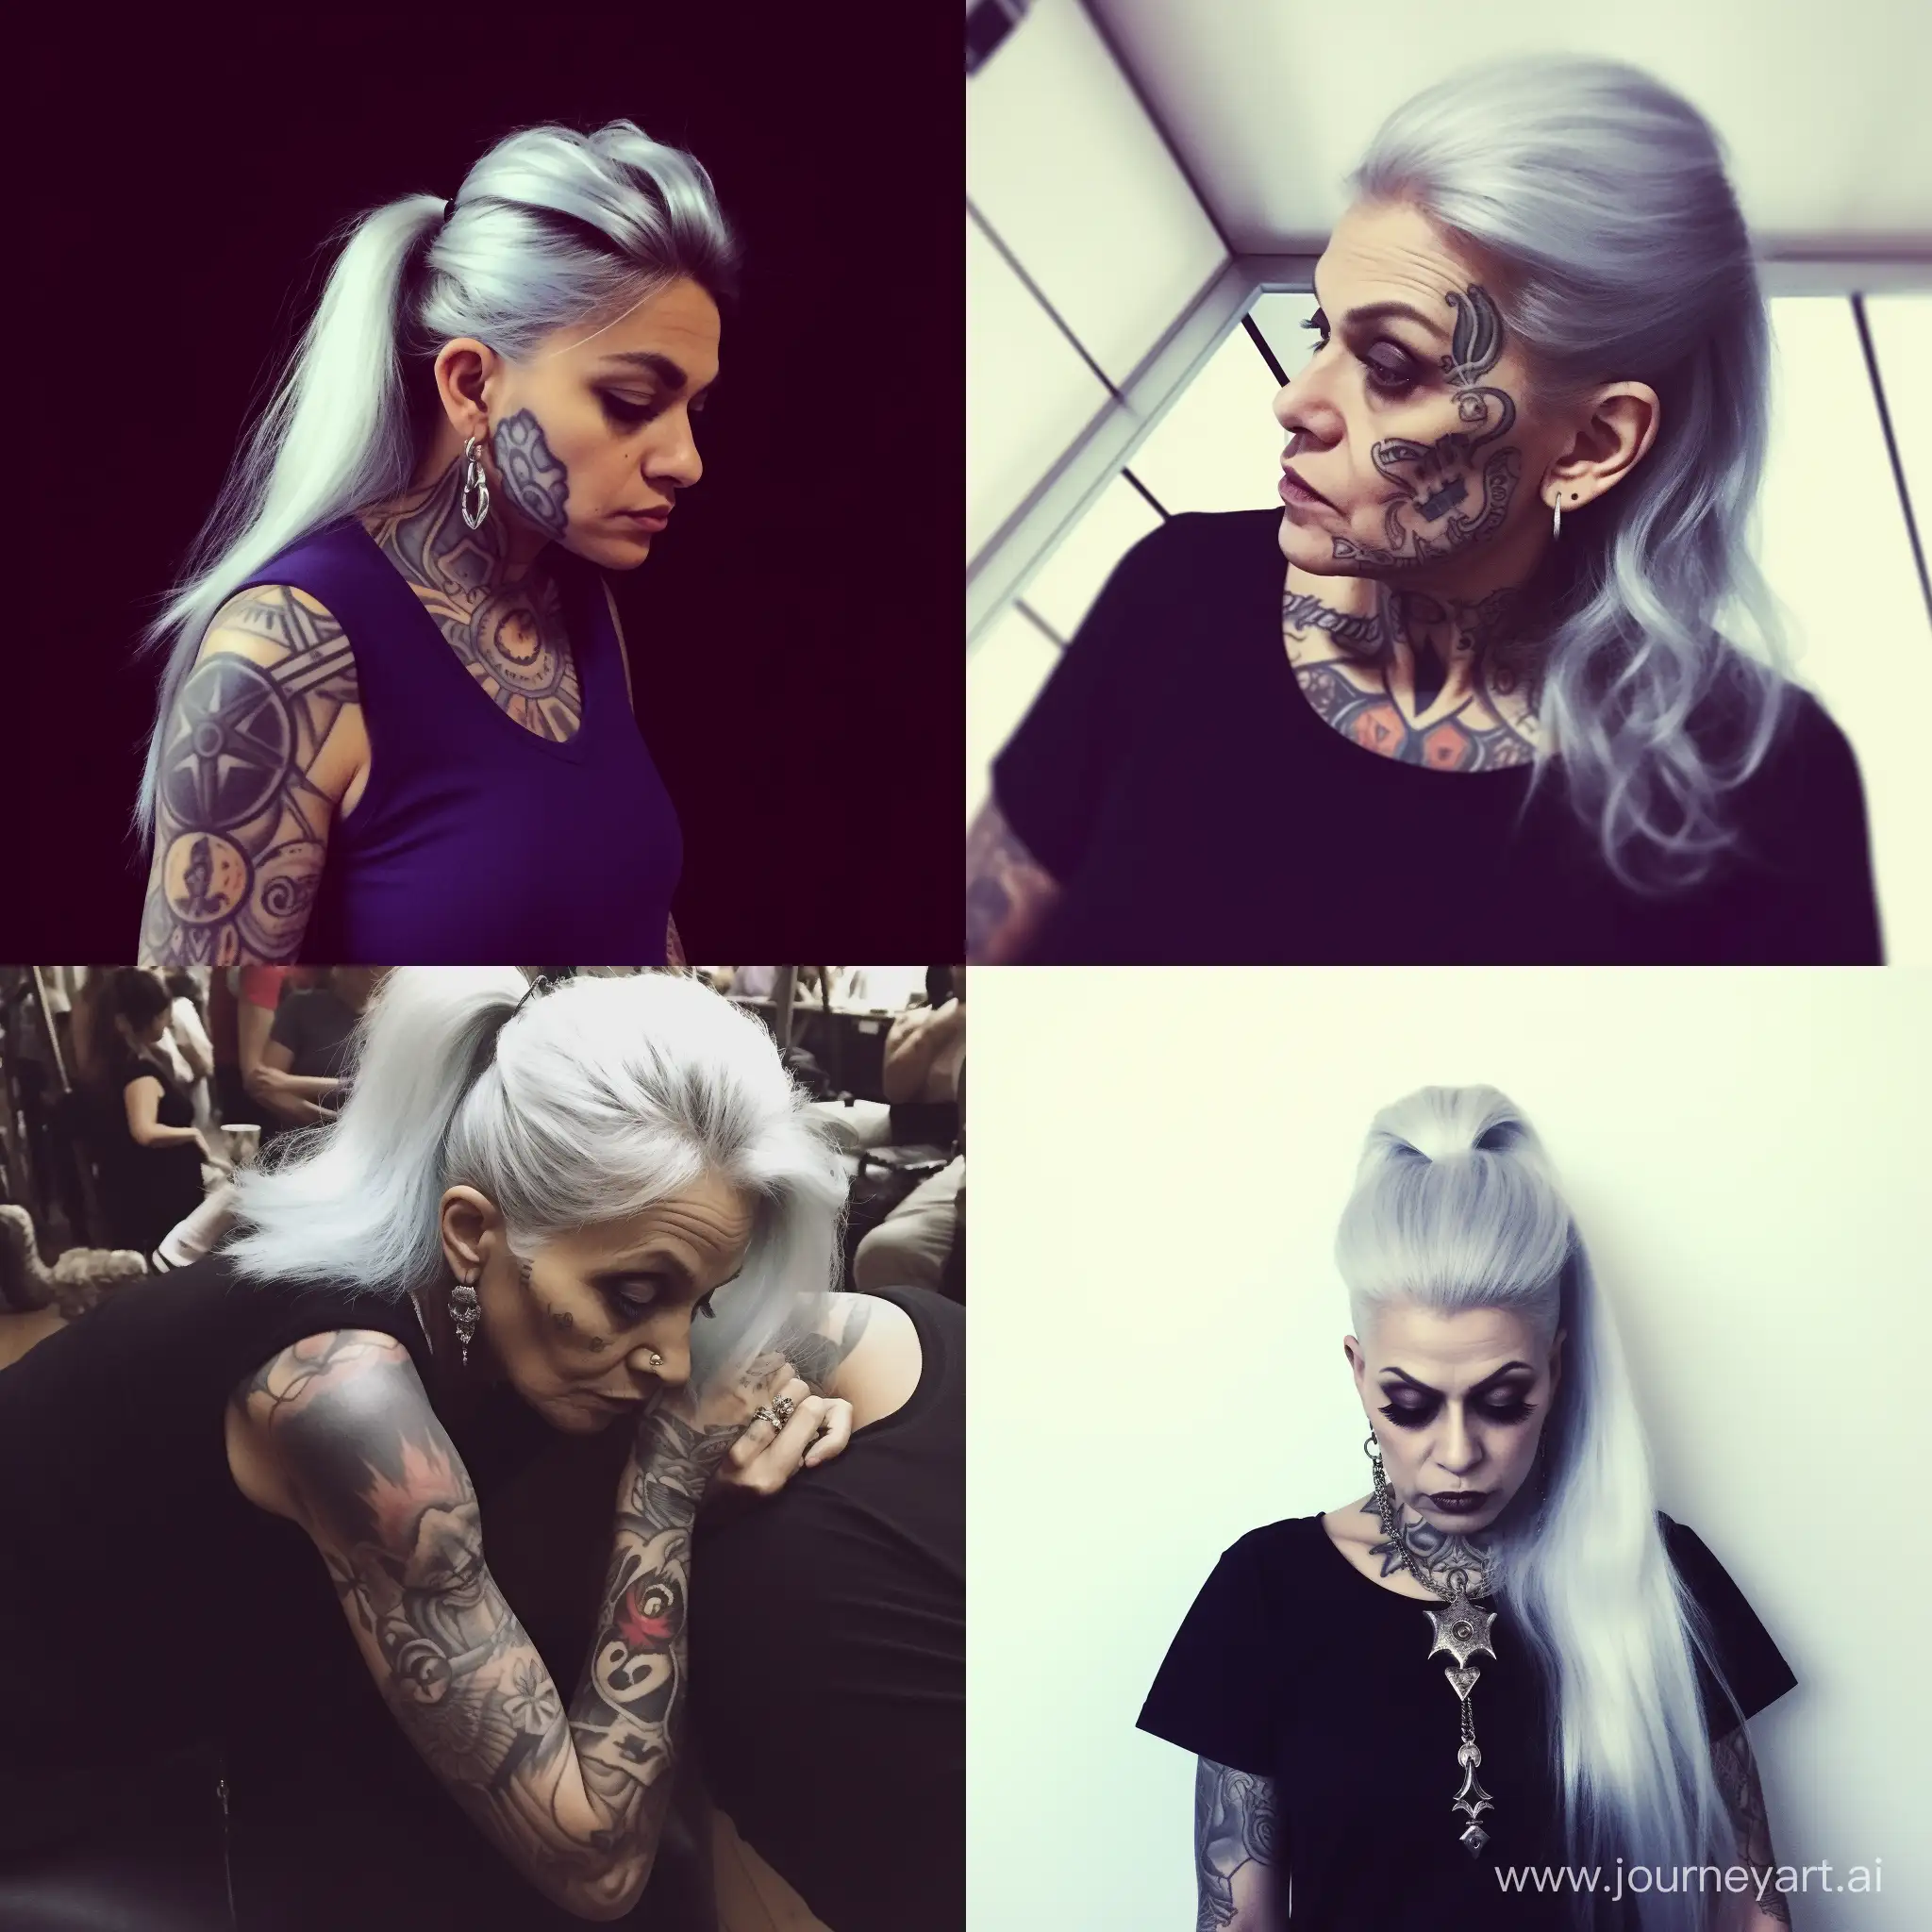 Edgy-Selfie-of-Tattooed-Woman-with-Silver-Hair-and-Piercings